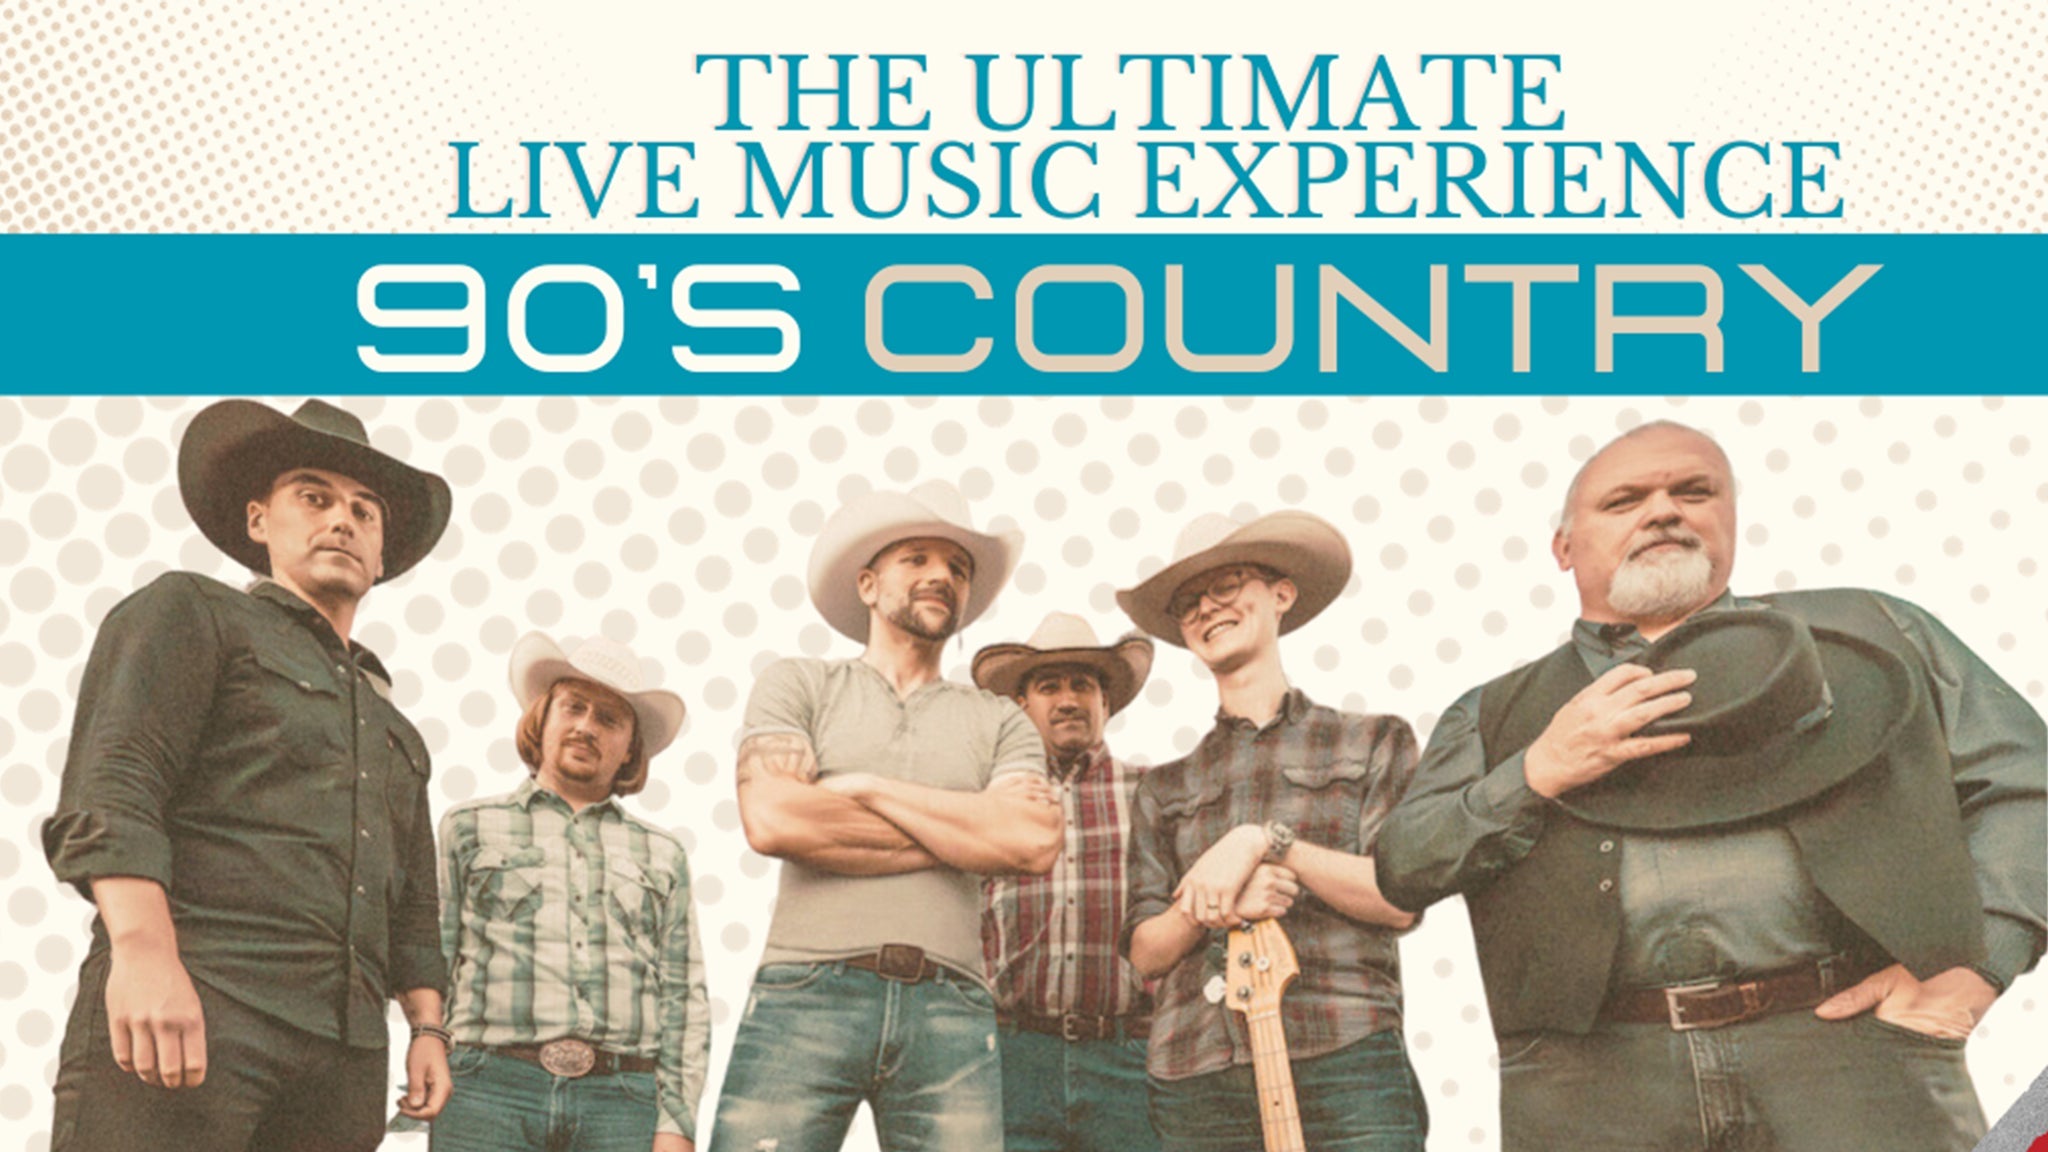 The Nashville Nights Band: The Ultimate 90's Country Experience pre-sale code for legit tickets in Columbia